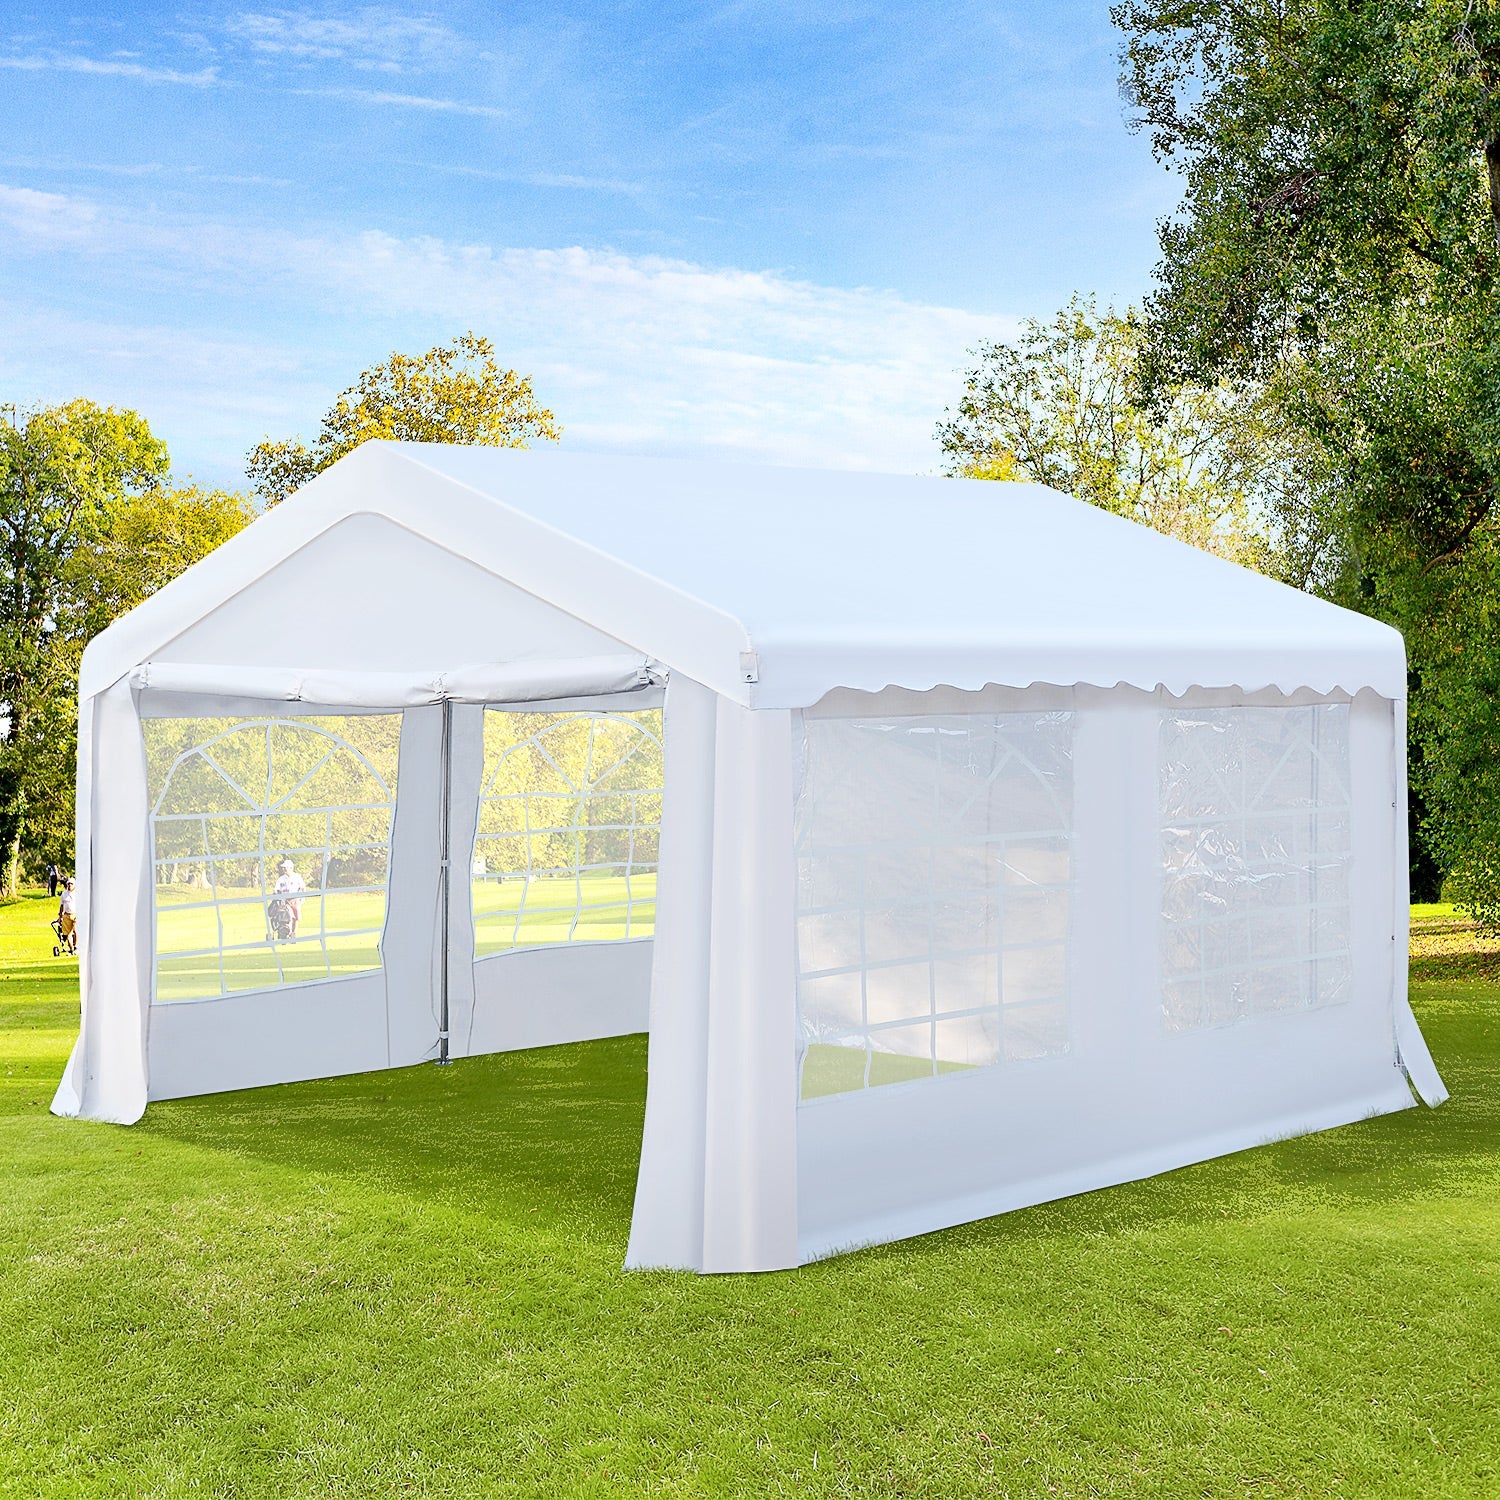 4m x 4 m Party Tents Portable Carport Shelter with Removable Sidewalls & Double Doors, Heavy Duty Party Tent Car Canopy-1